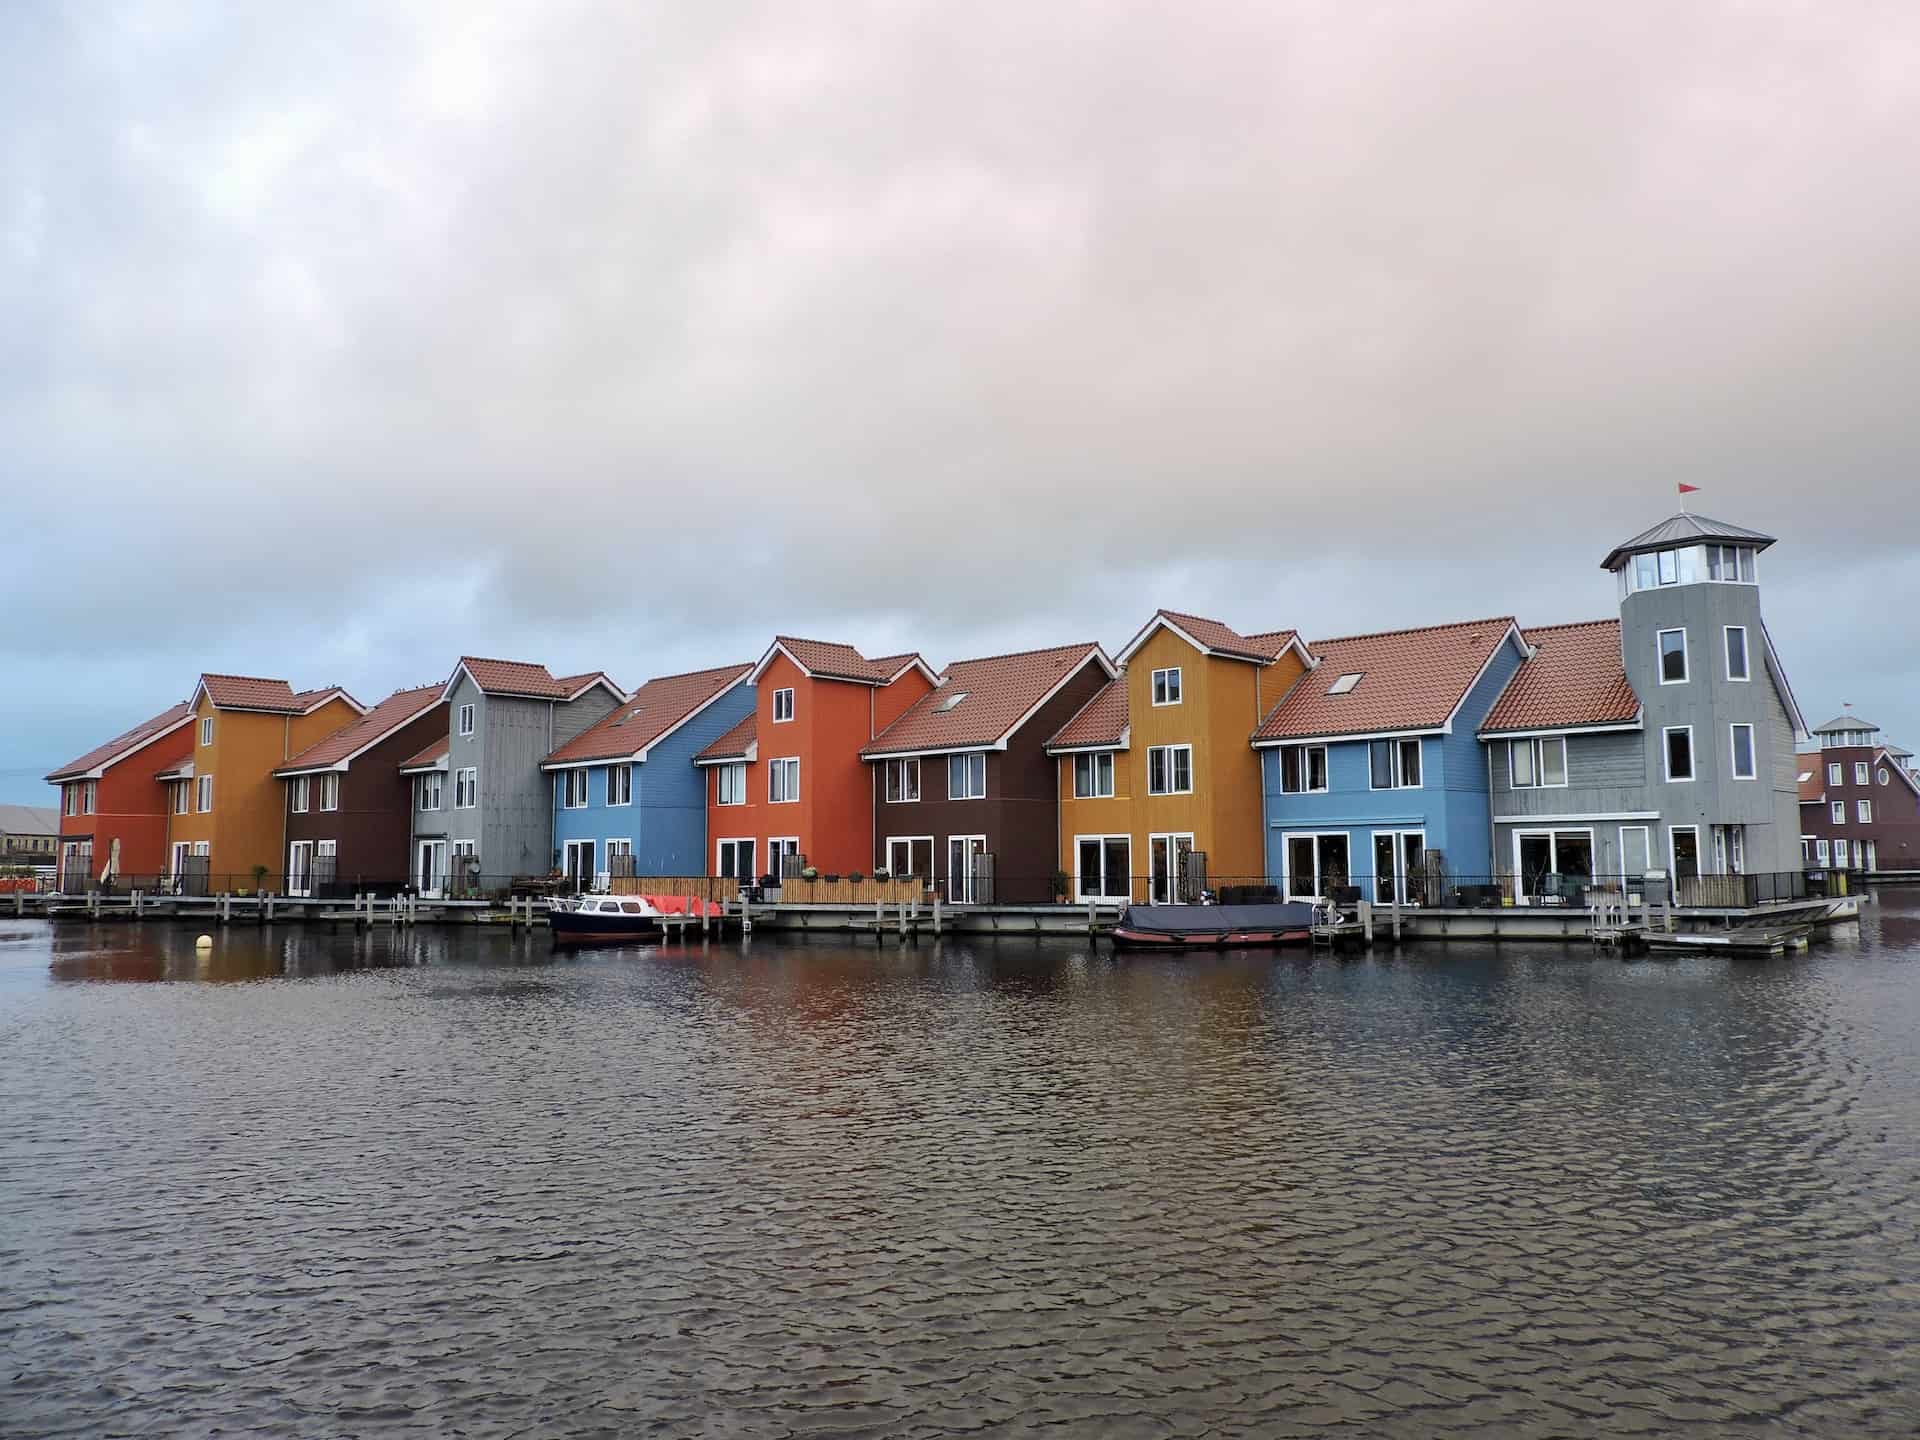 Best things to do in Groningen Netherlands - Kayla Ihrig - Colorful houses of Reitdiephaven by Alvaro Sanchez on Unsplash